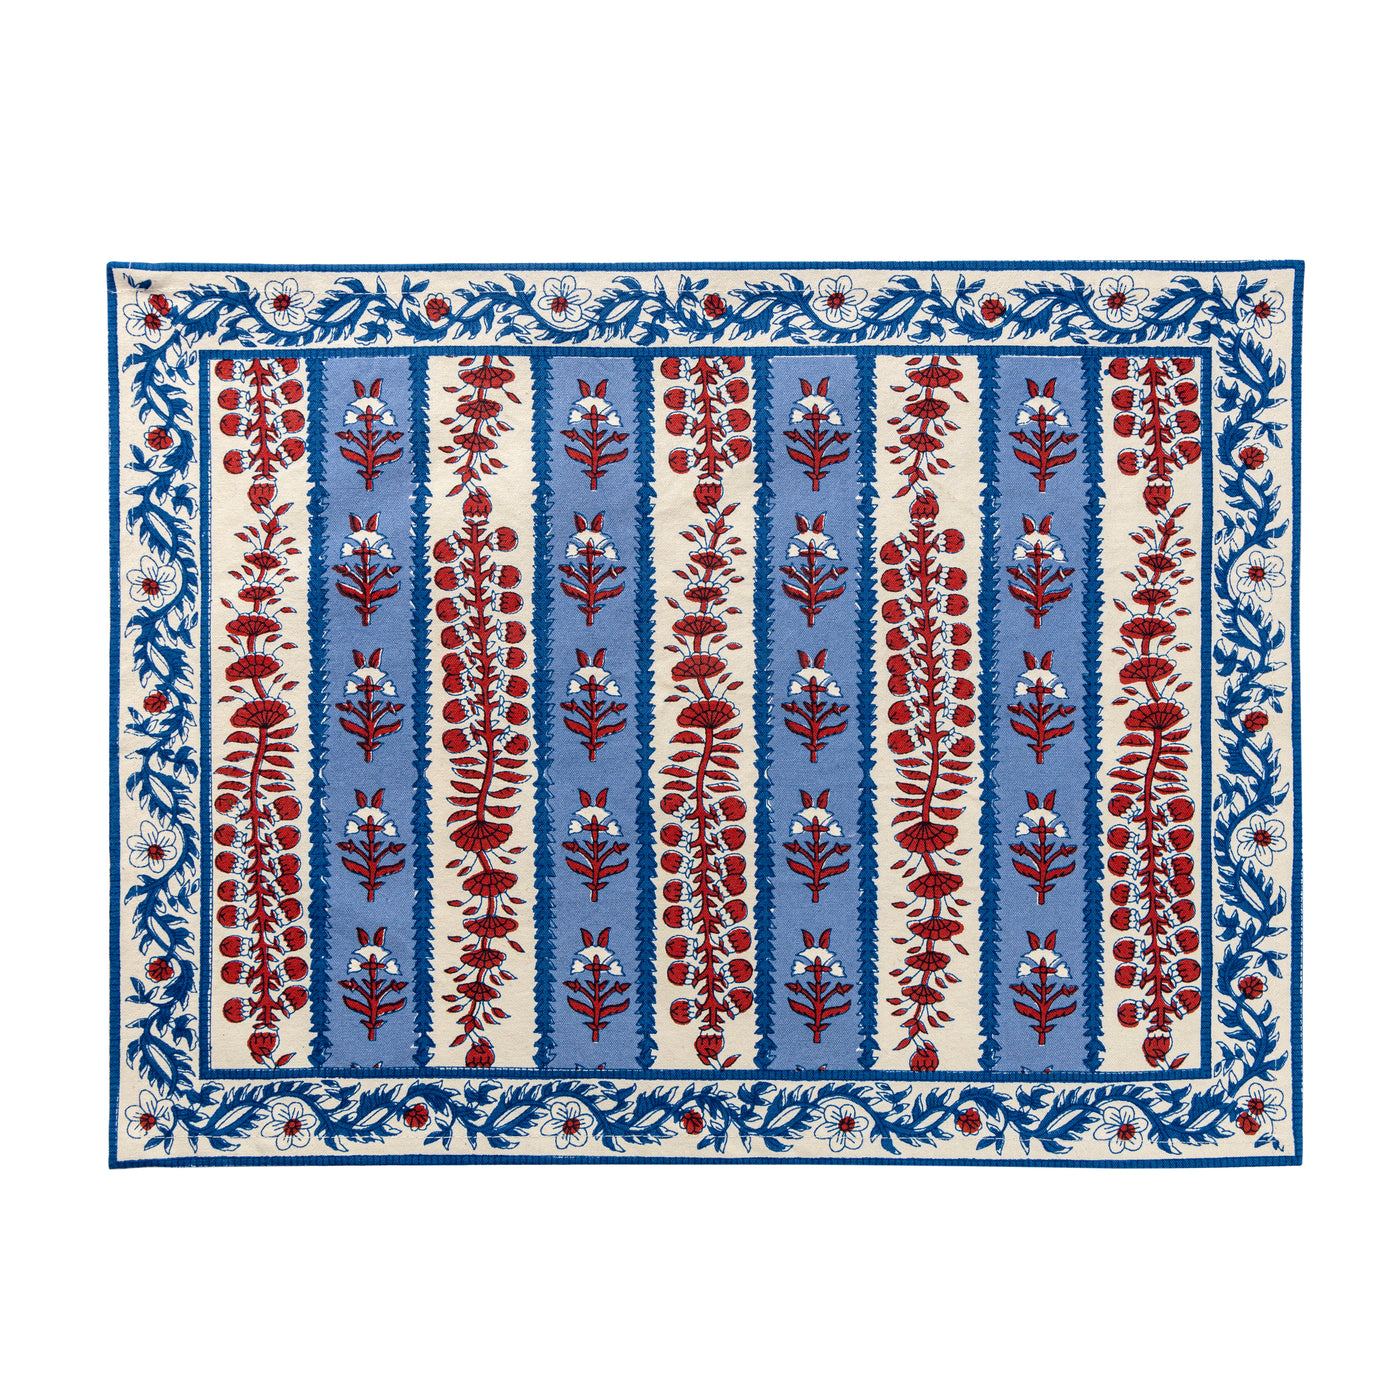 Avignon Placemats Red & Blue, Set of 6